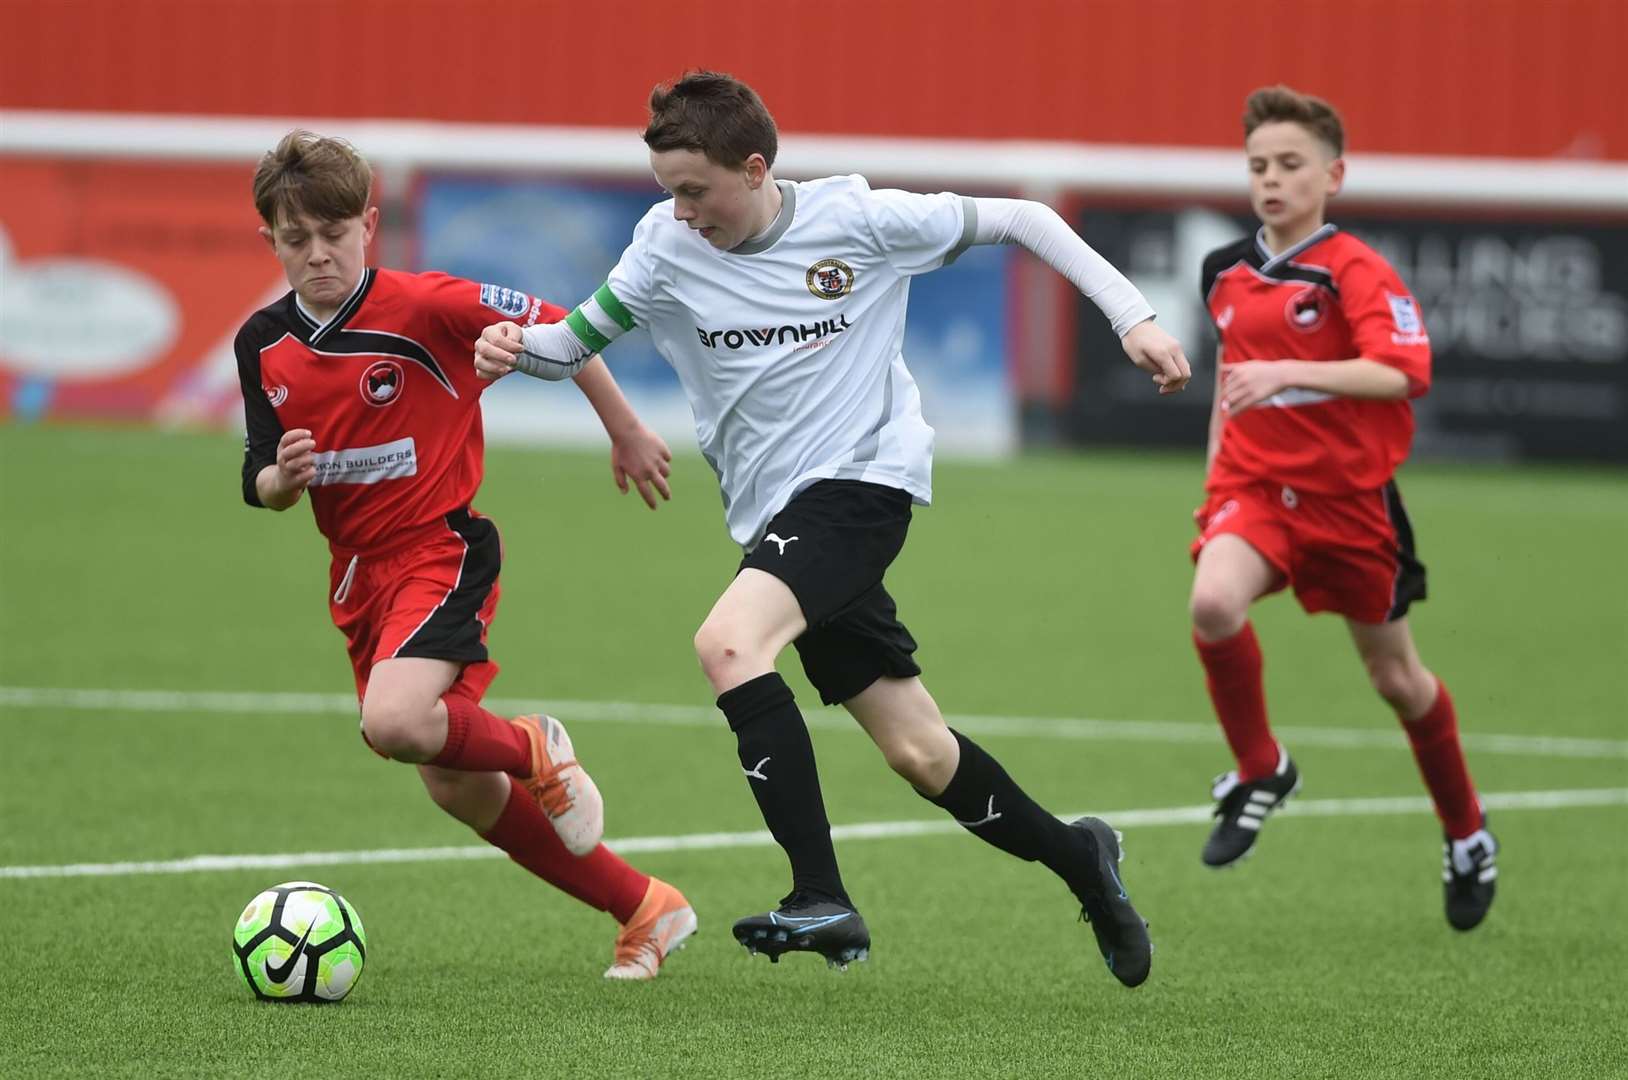 Bromley under-13s captain Tommy O'Donnell on the ball on Sunday. Picture: PSP Images